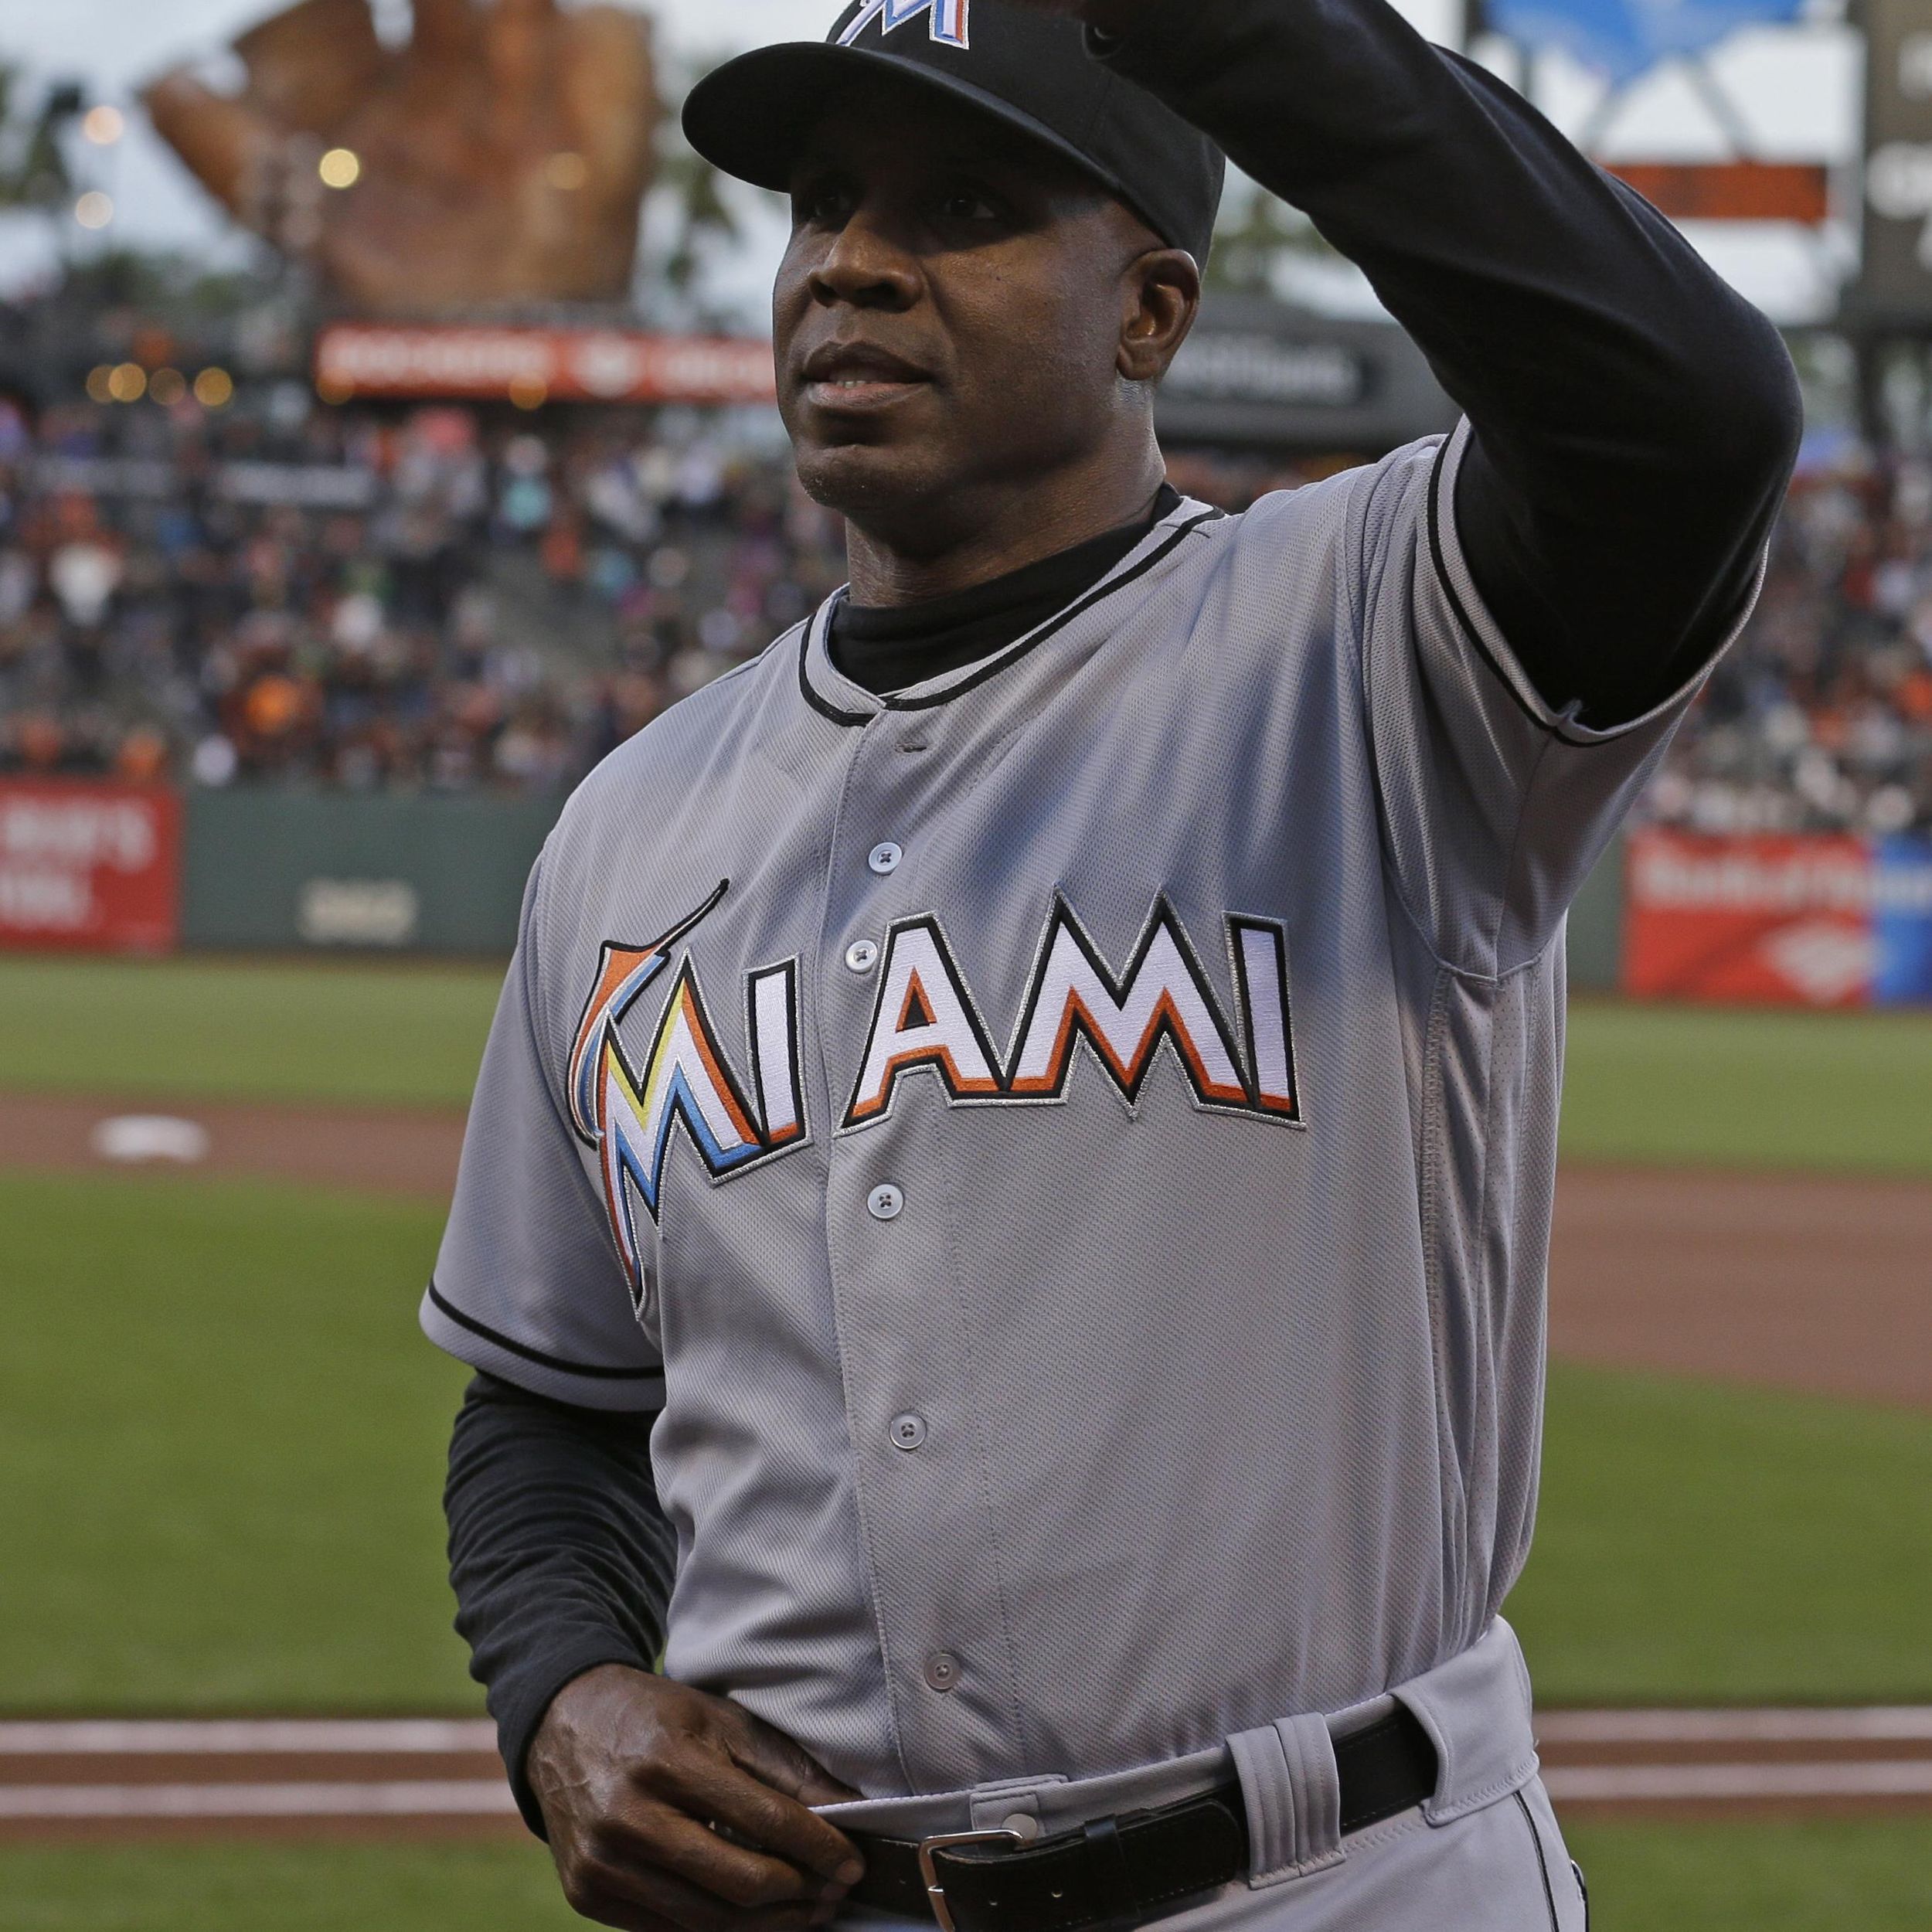 MLB Notes: Coach Barry Bonds returns to AT&T Park in a Marlins